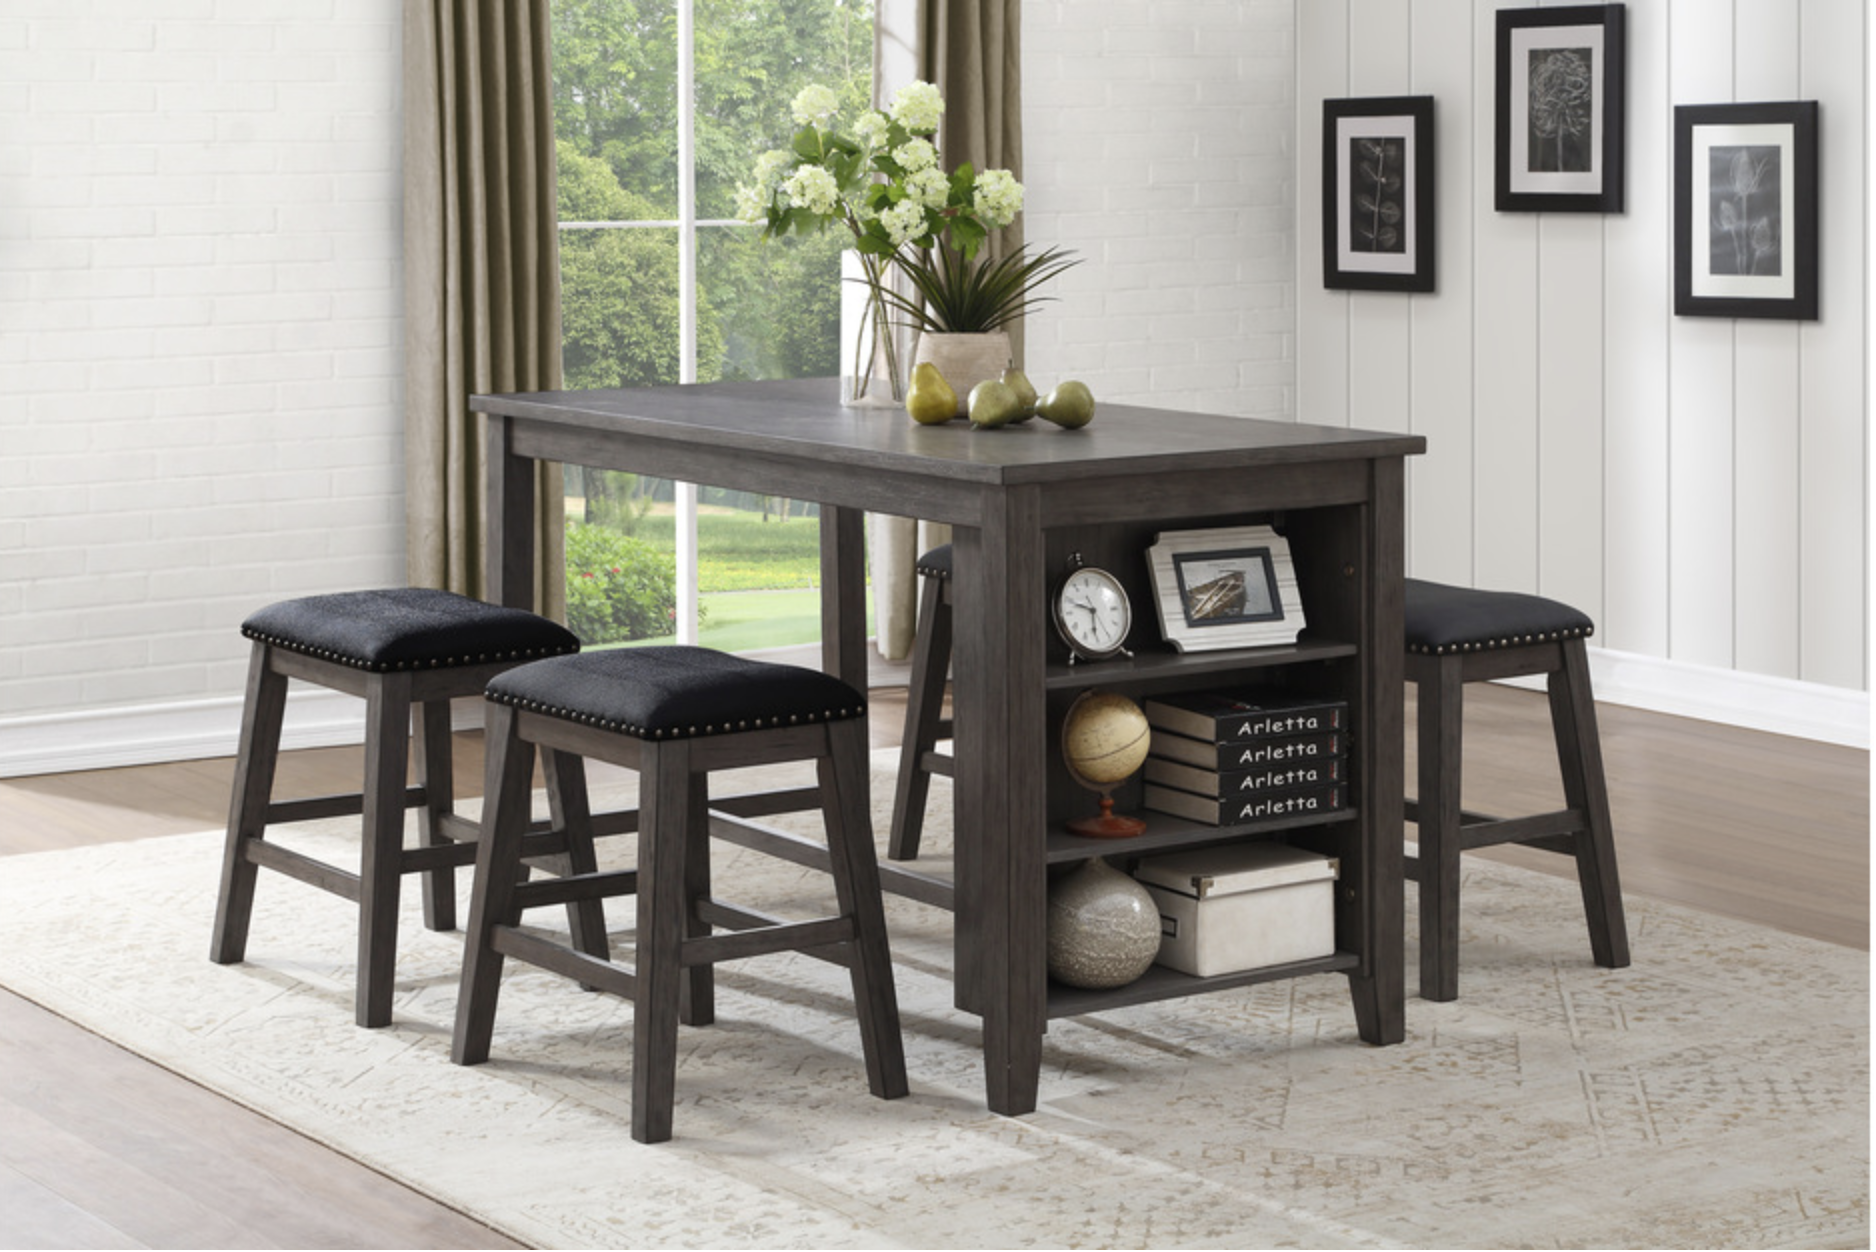 Timbre Dining Table w/ 4 Bar Stools,In-Store Products